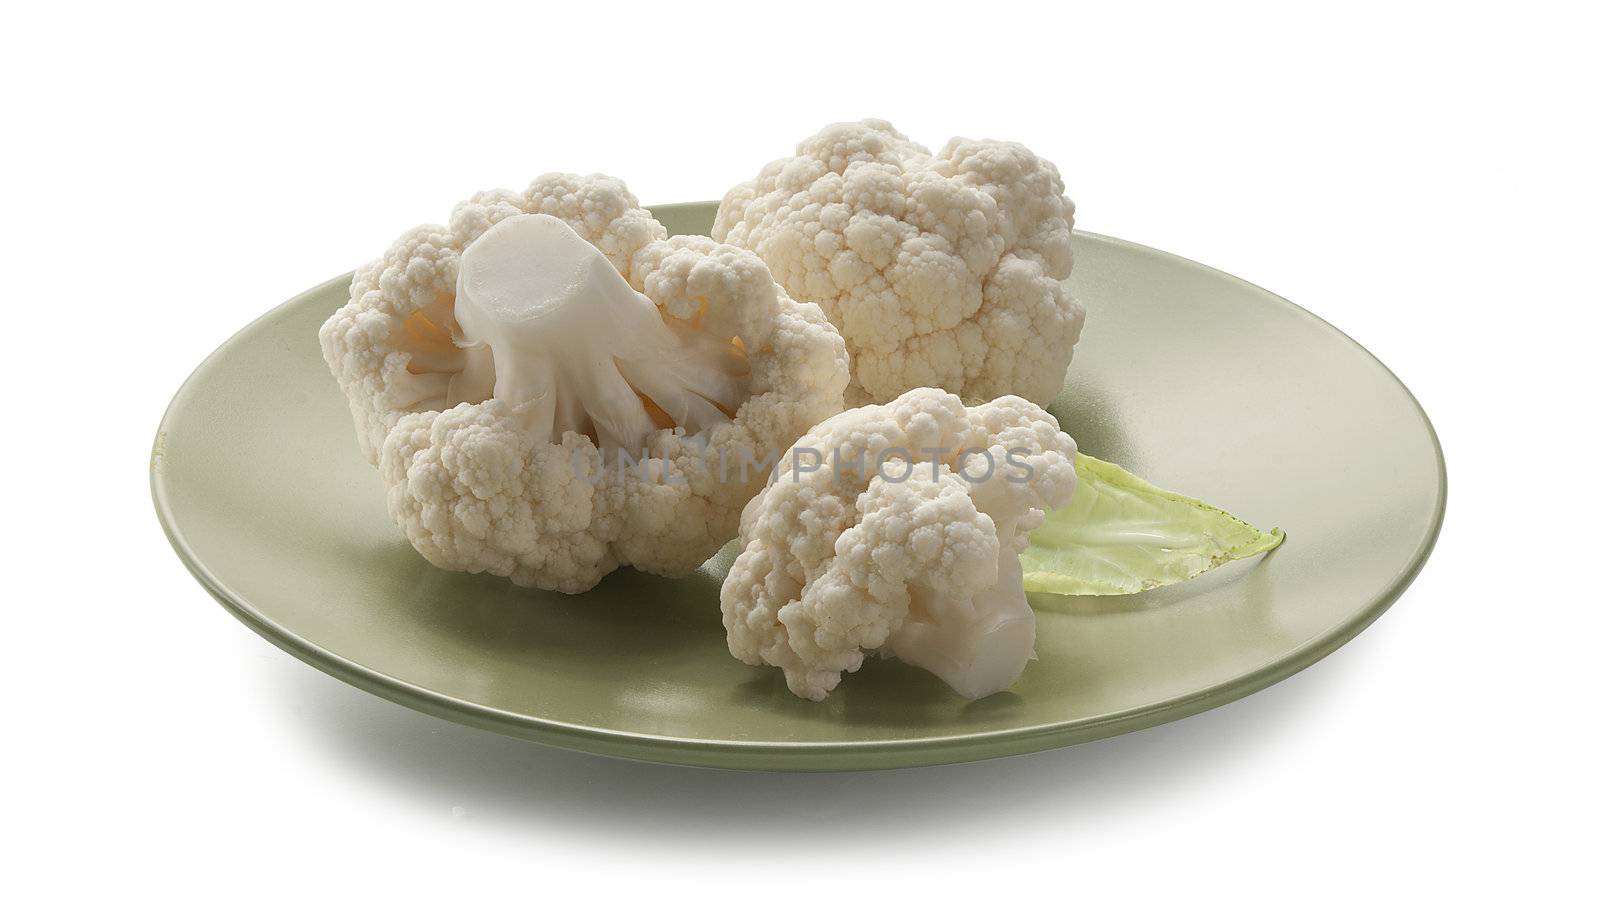 Three pieces of cauliflower on the green plate